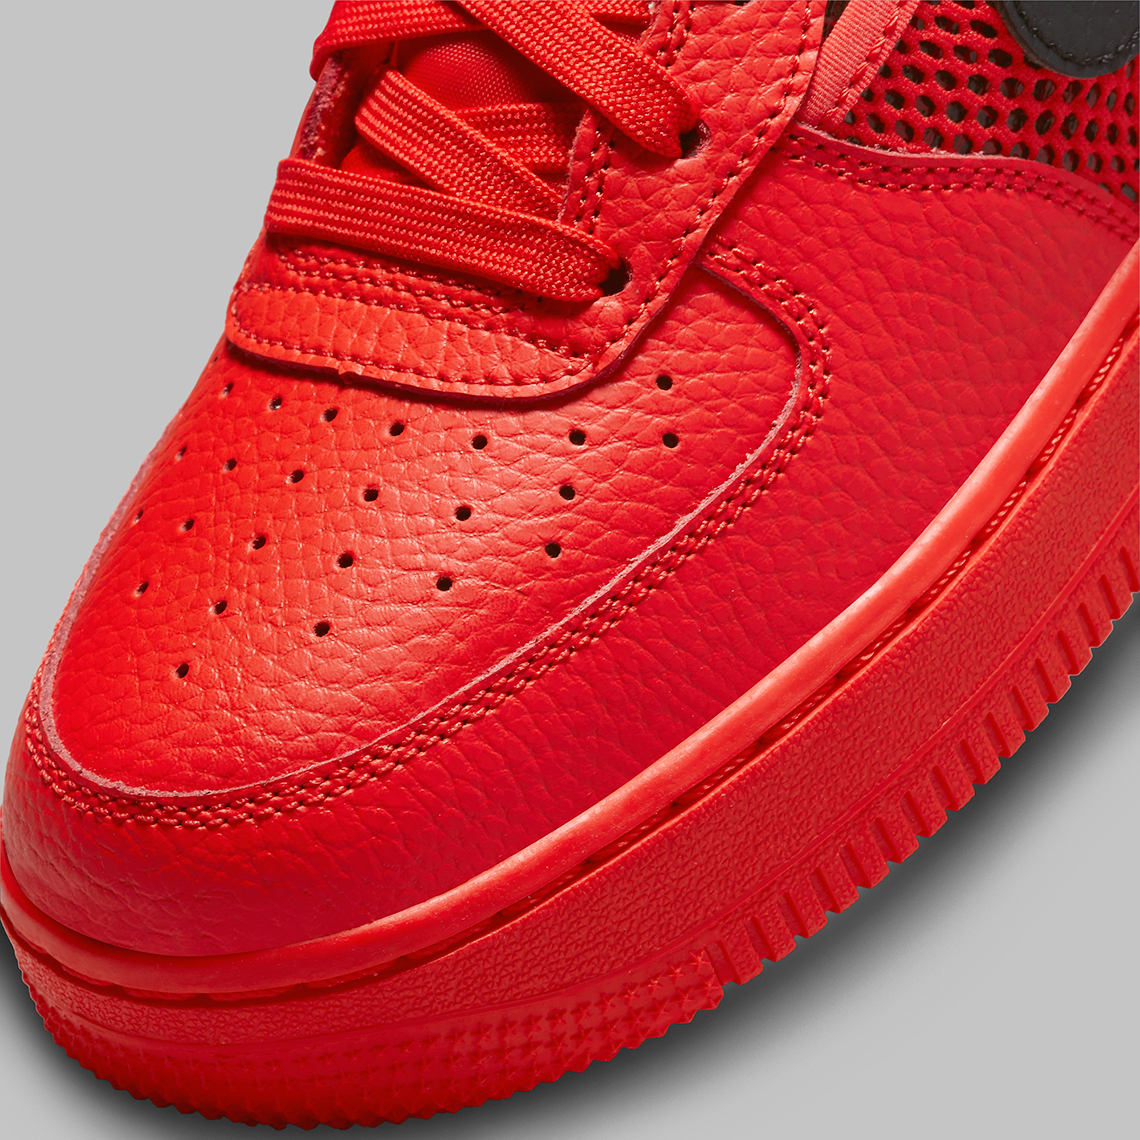 Nike Air Force 1 Low Gs Mesh Red Black Dh9596 600 3